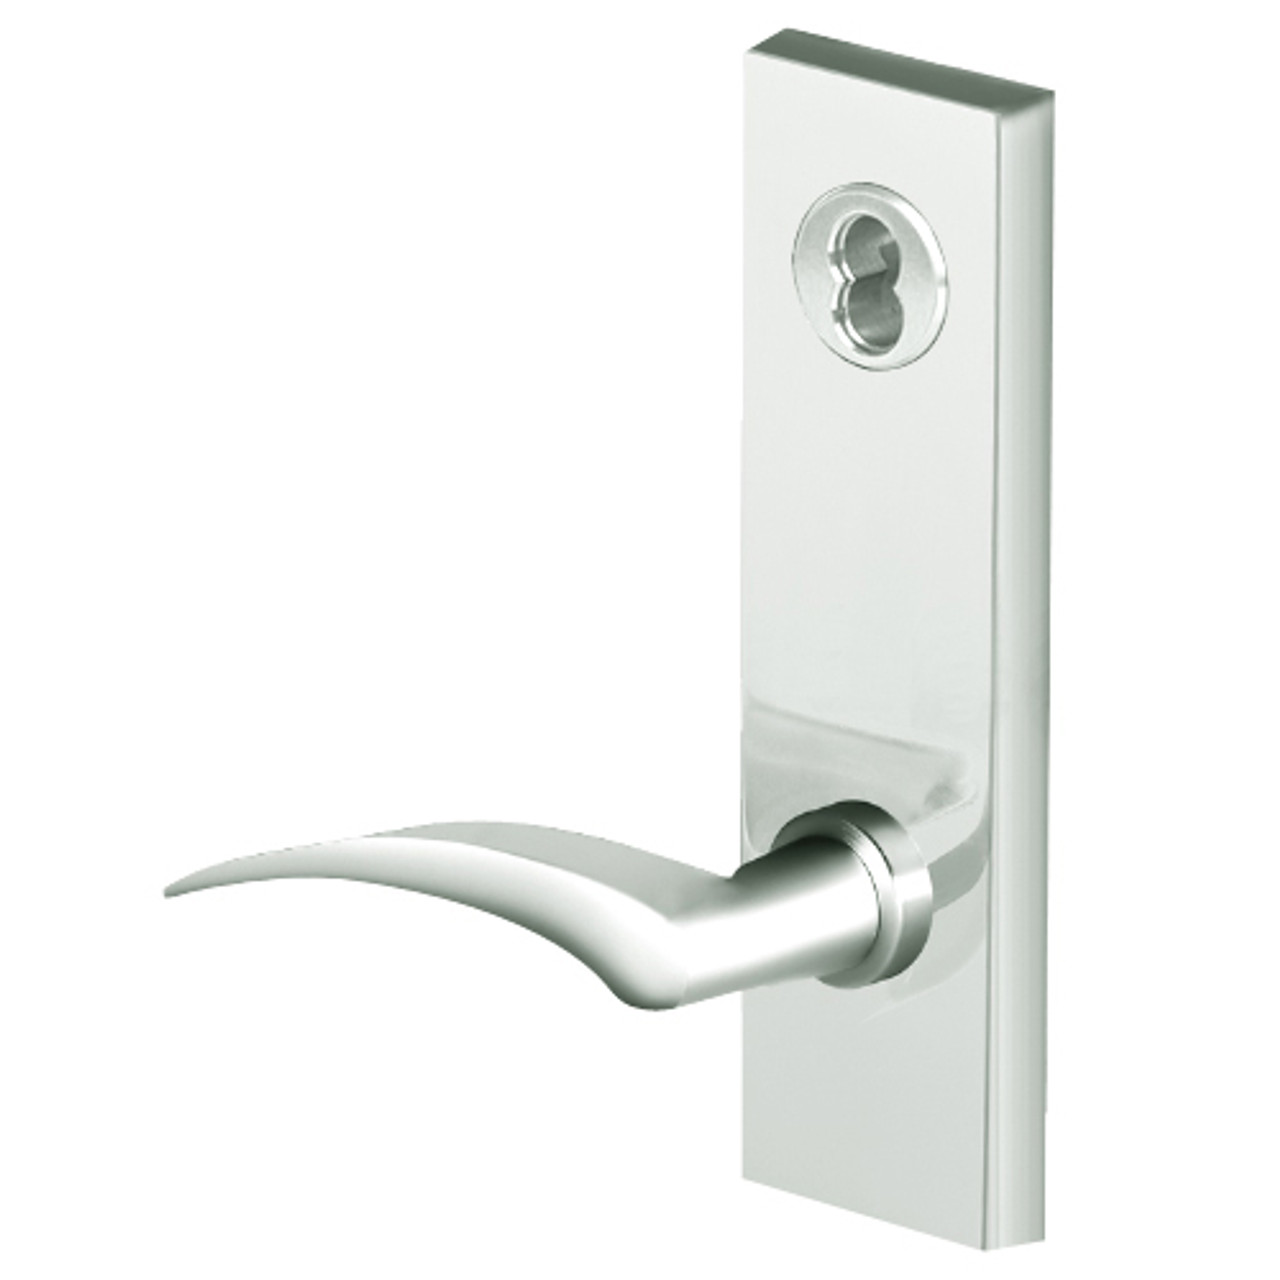 45H7H17LM618 Best 40H Series Hotel with Deadbolt Heavy Duty Mortise Lever Lock with Gull Wing LH in Bright Nickel